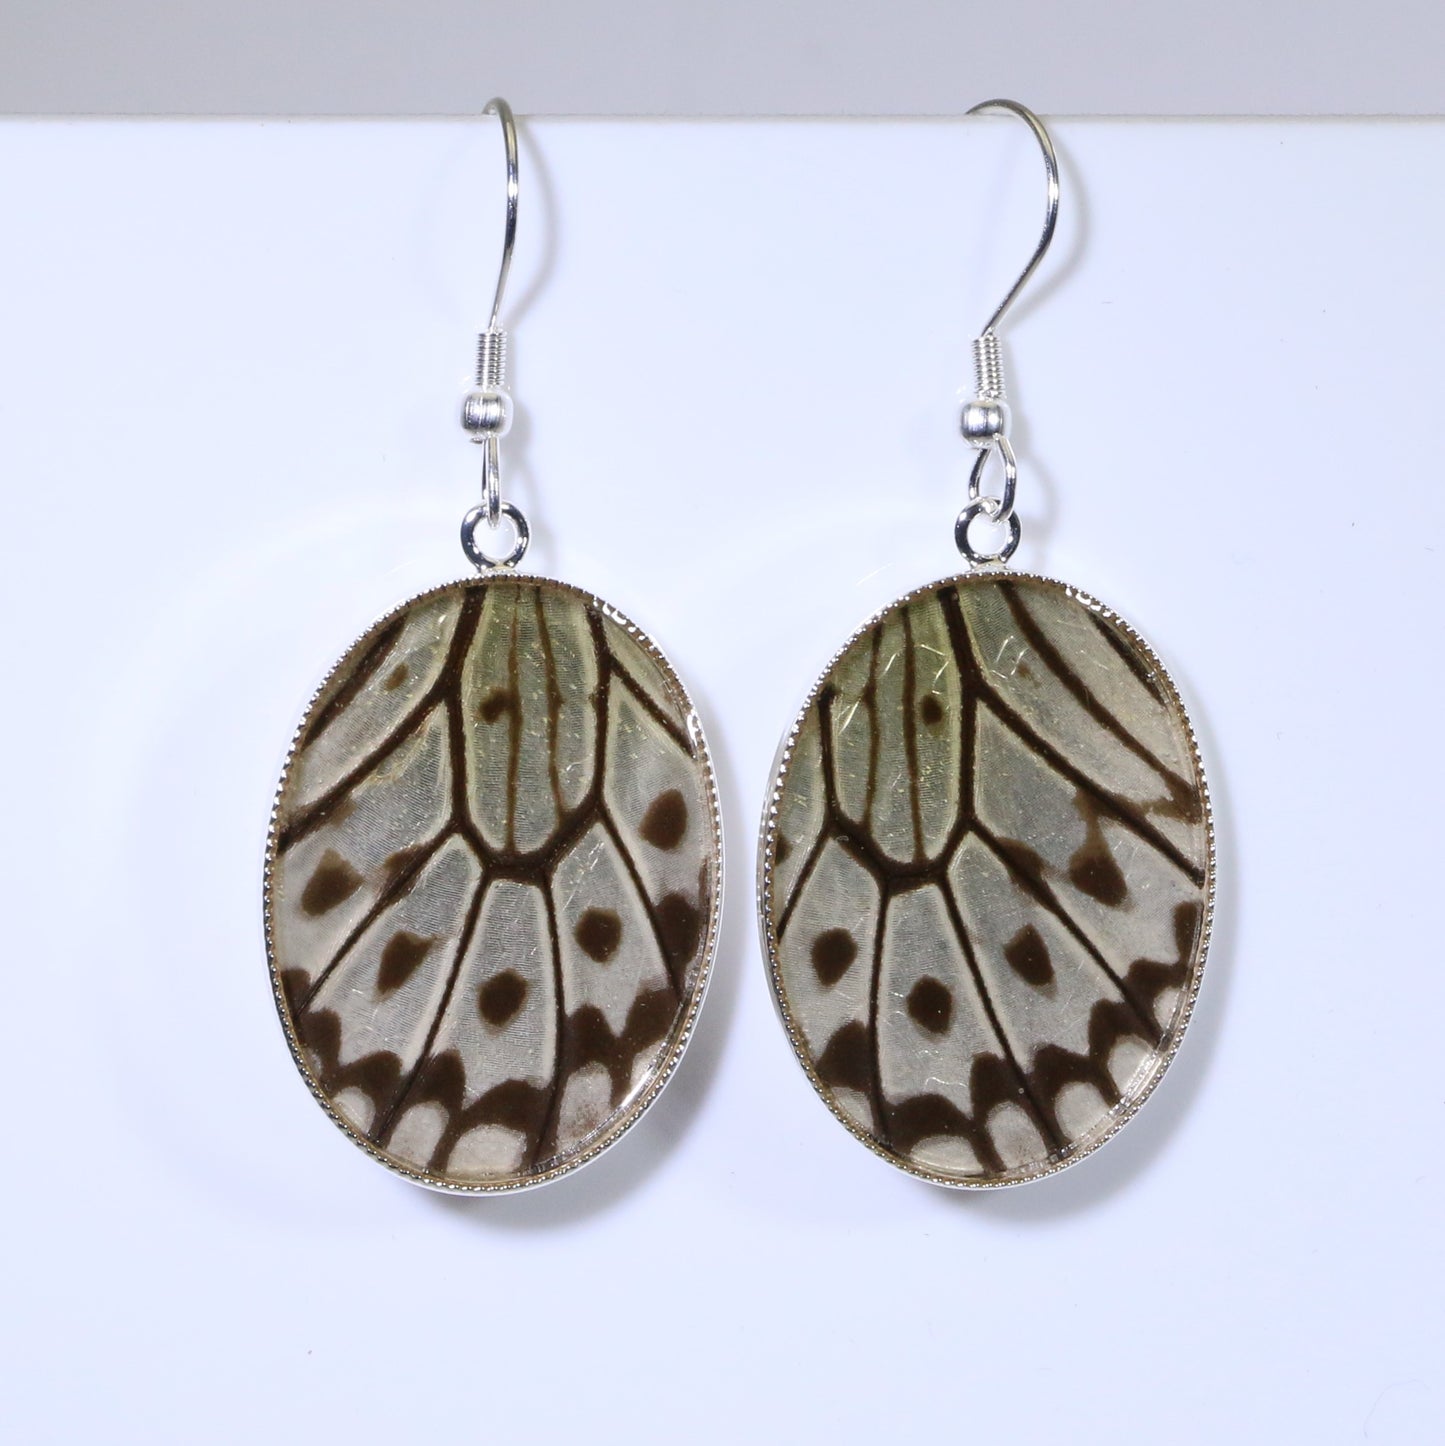 51309 - Real Butterfly Wing Jewelry - Earrings - Large - Paper Kite